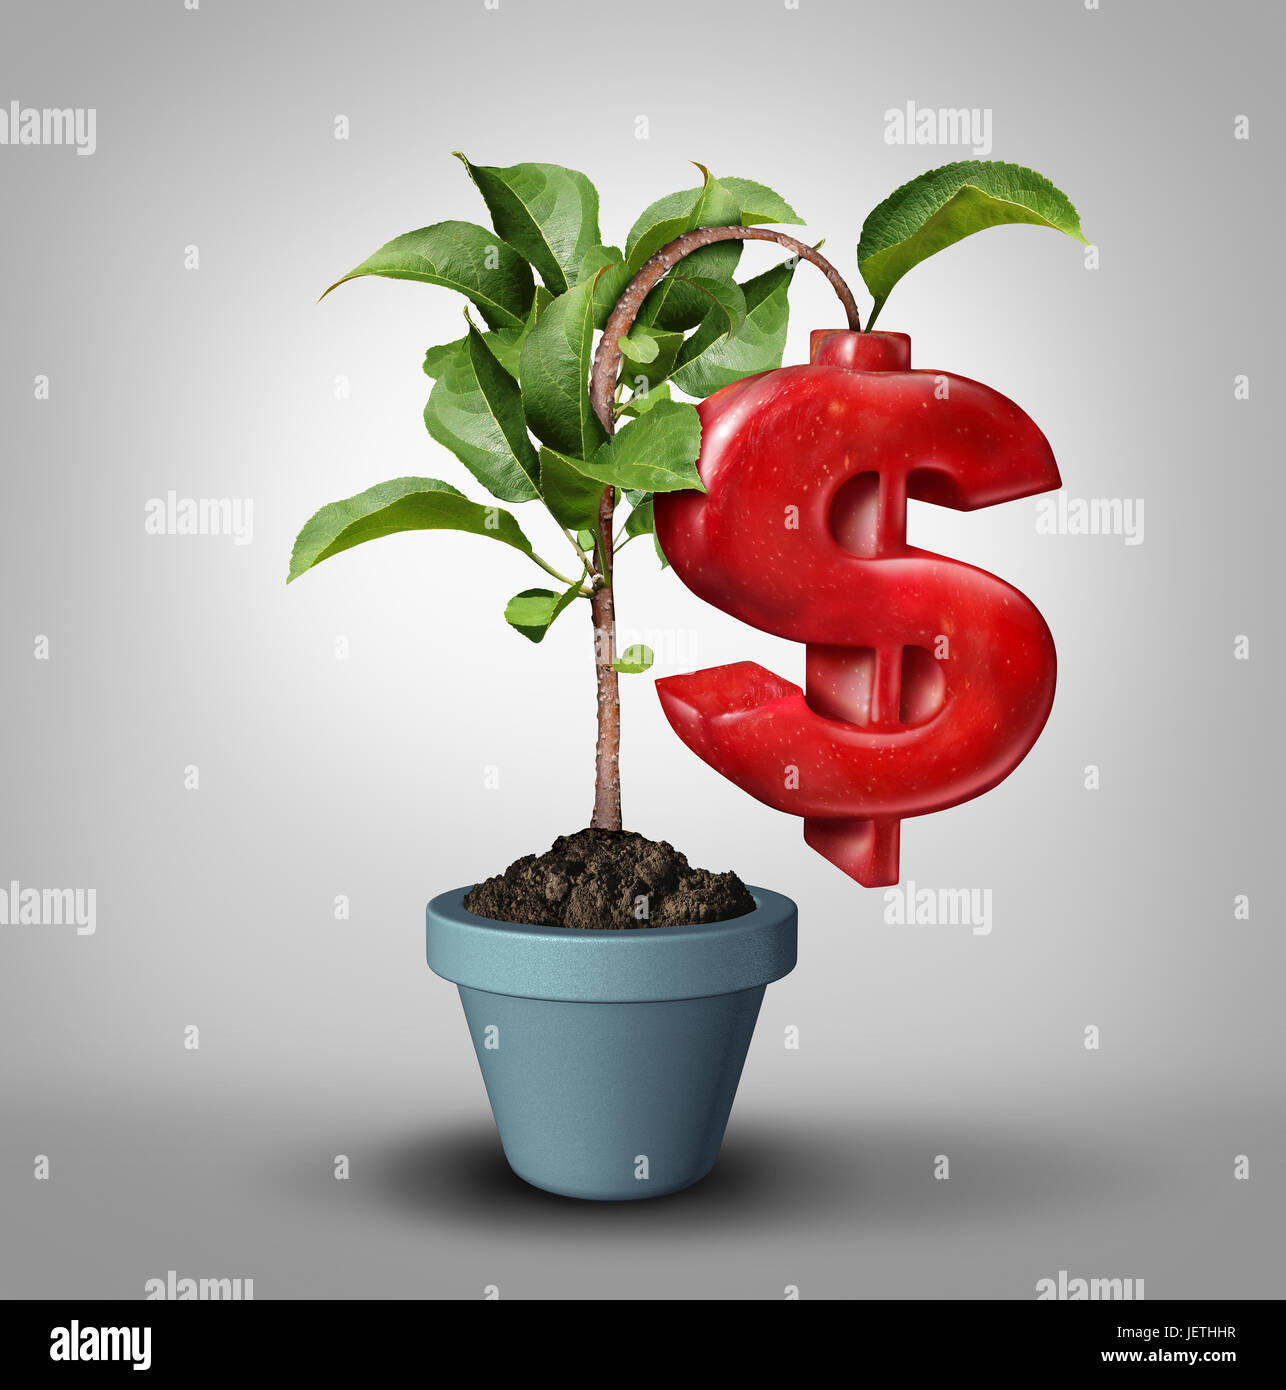 Money tree and fruitful investment business financial concept as a tree growing an apple shaped in a money symbol as a profitable finance. Stock Photo